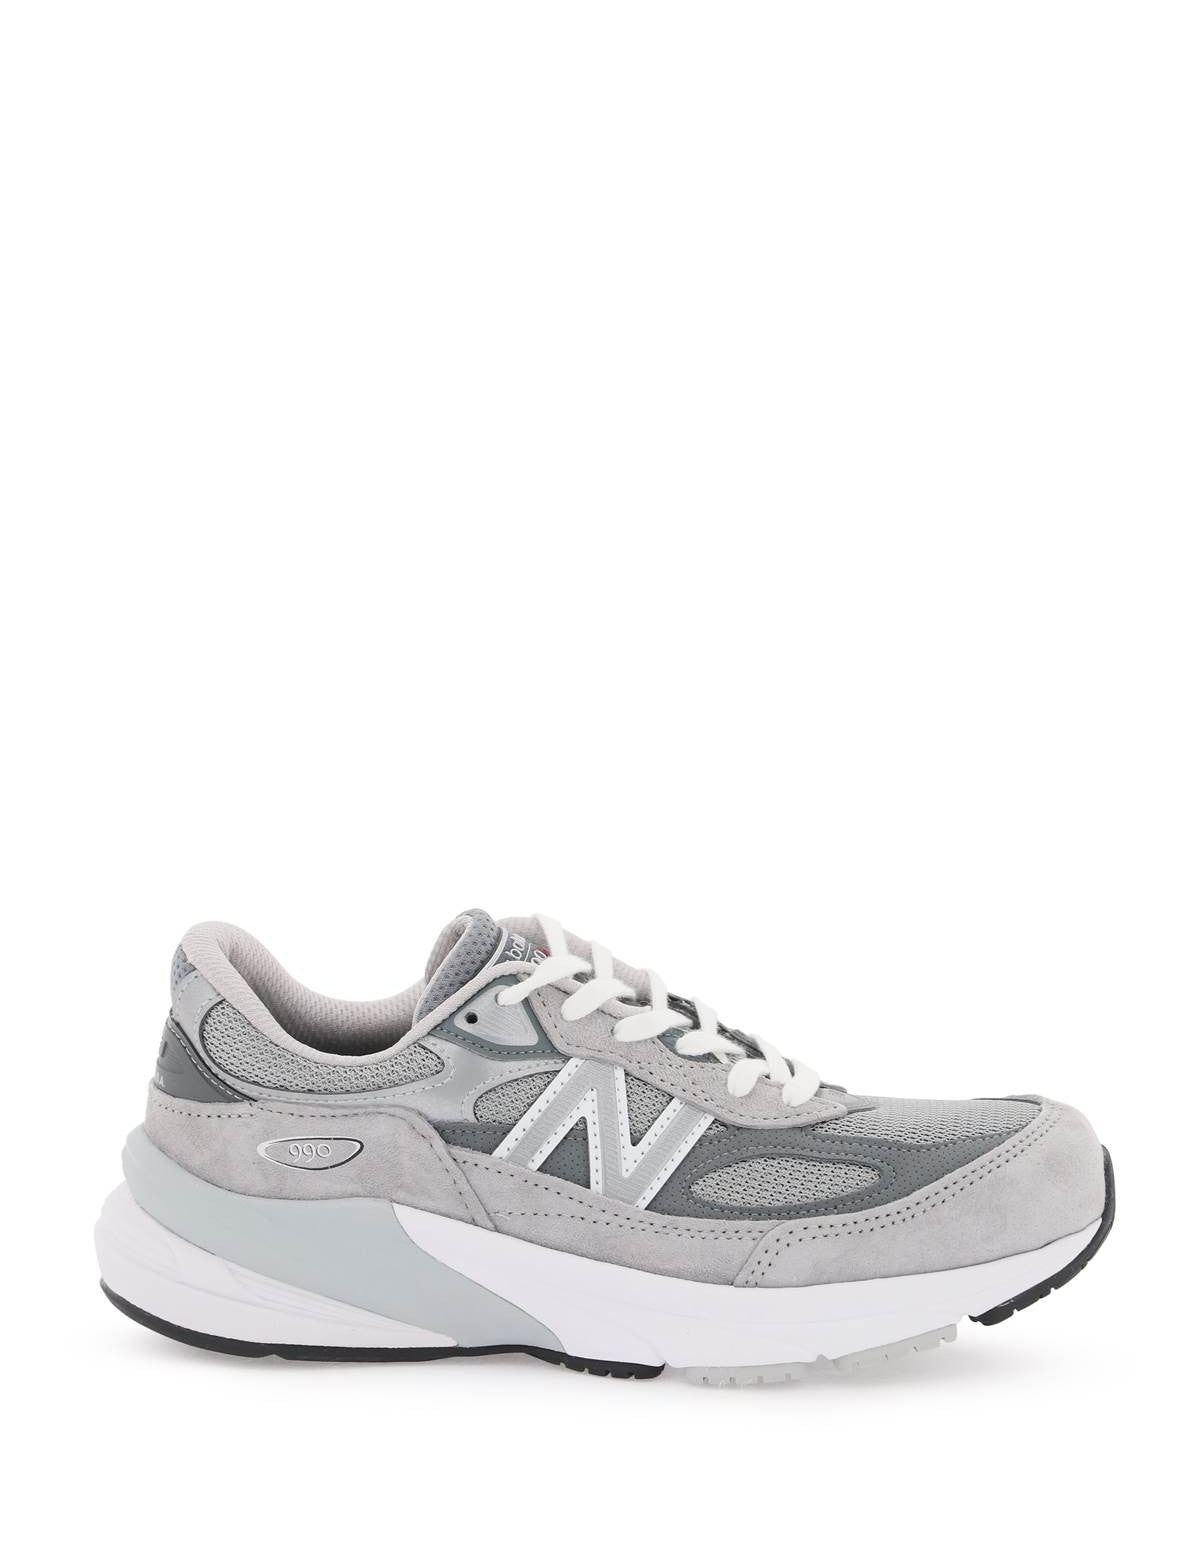 new-balance-990v6-sneakers-made-in.jpg